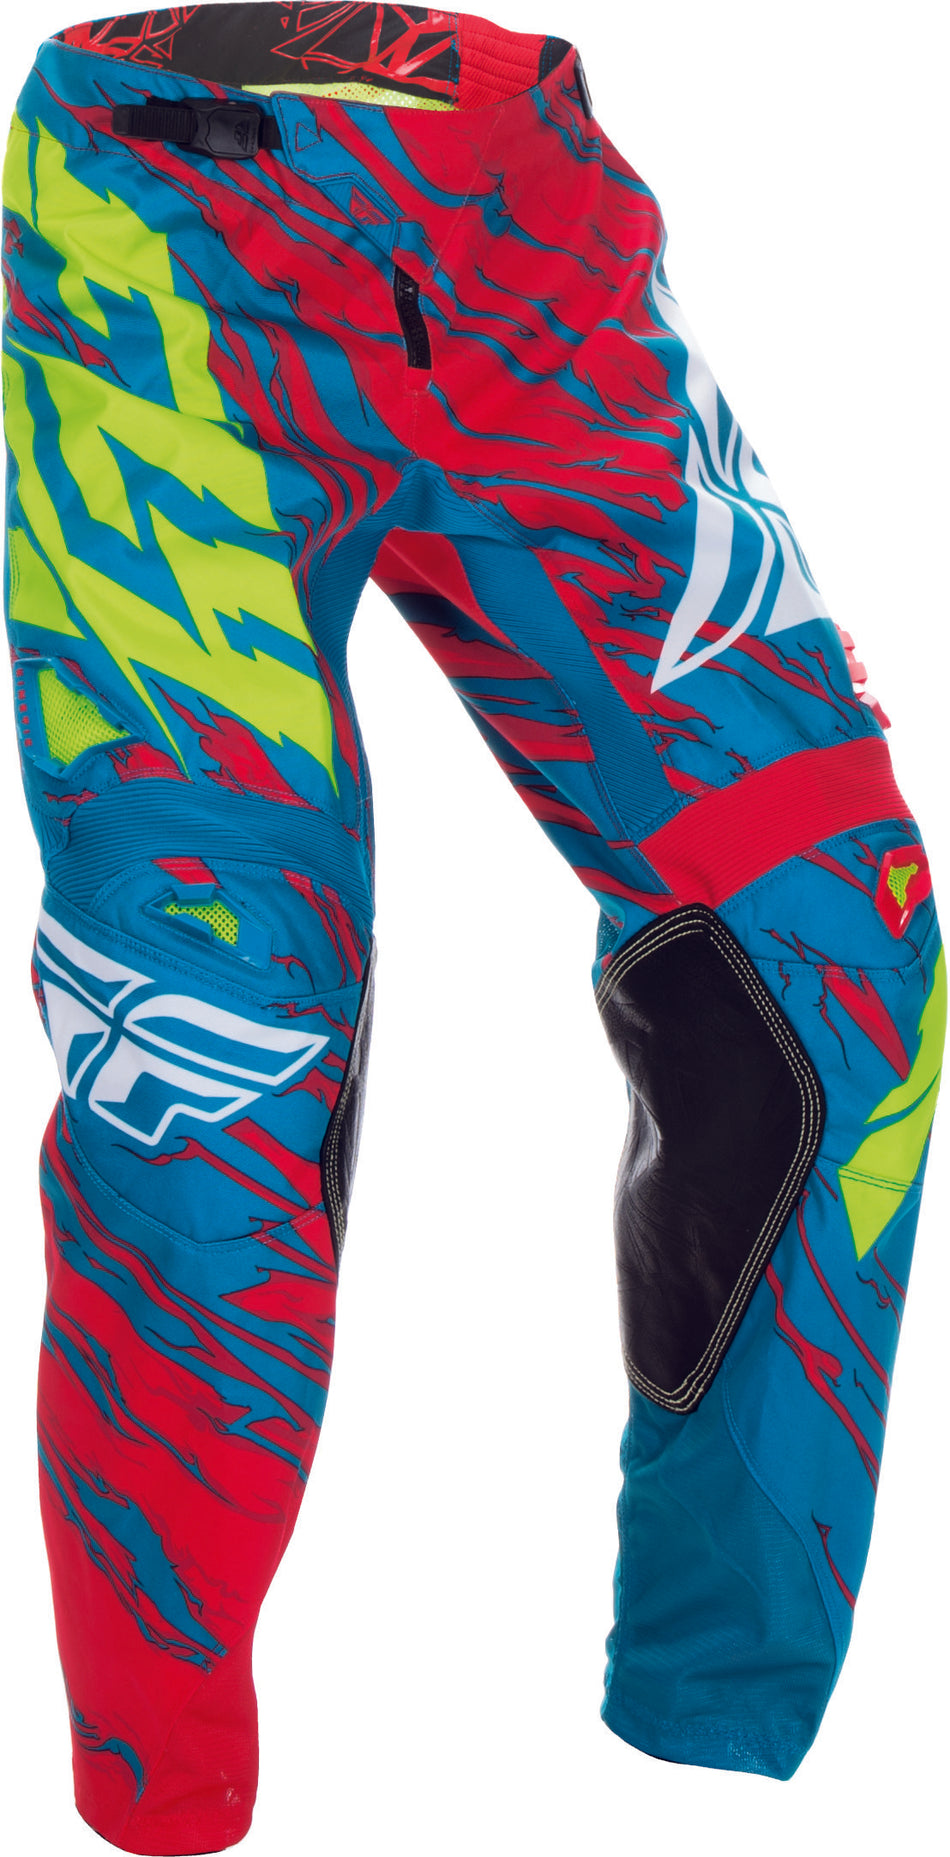 FLY RACING Kinetic Relapse Pant Teal/Red Sz 38 370-43938